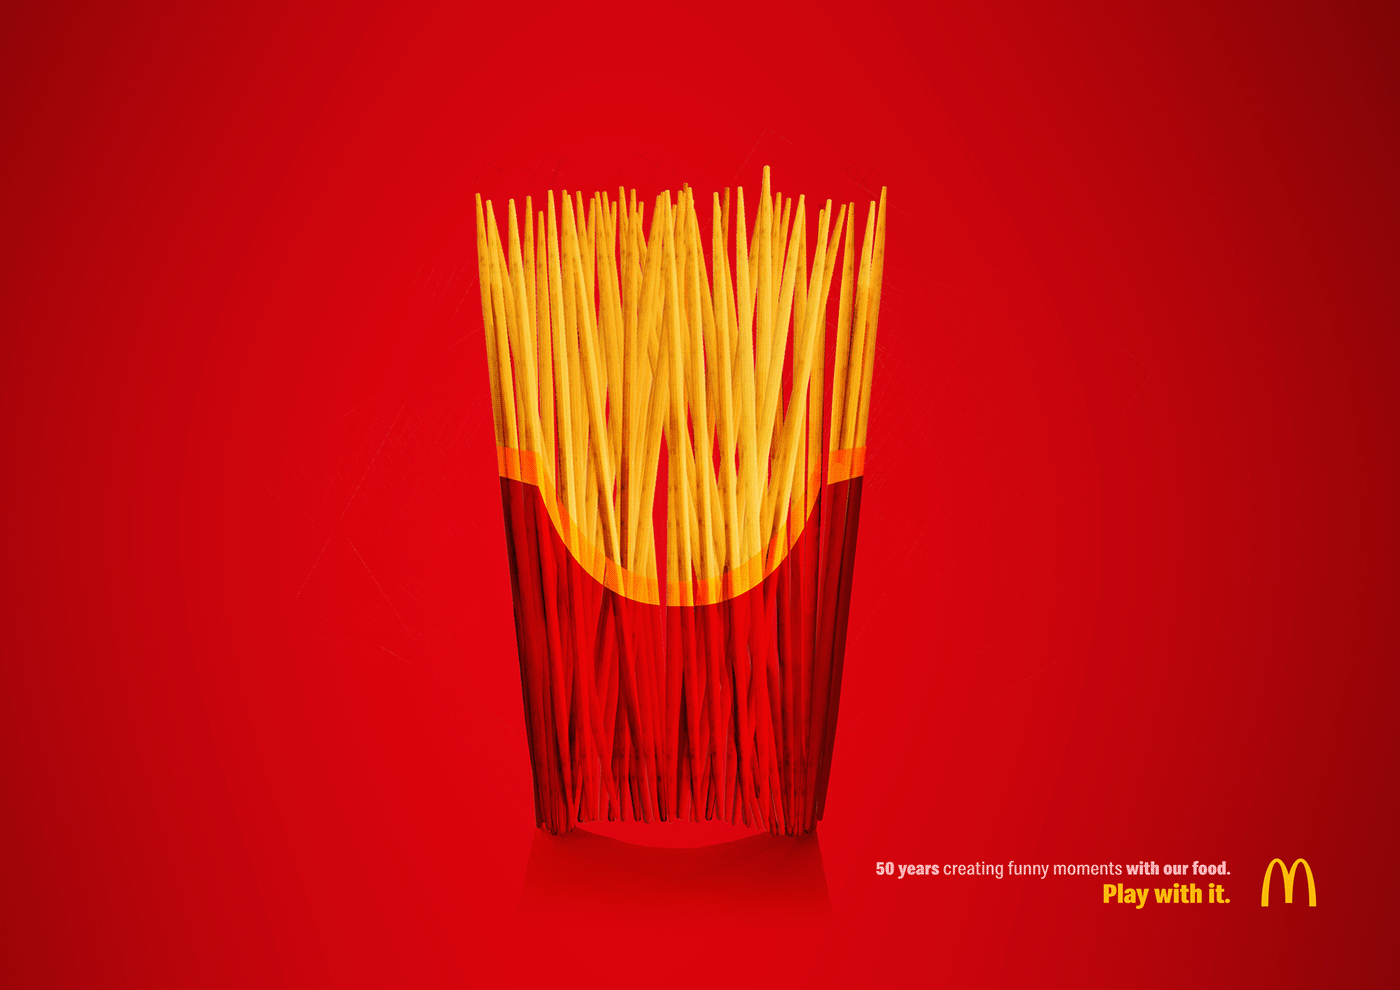 McDonalds print Young lions design toy product concept artwork Outdoor